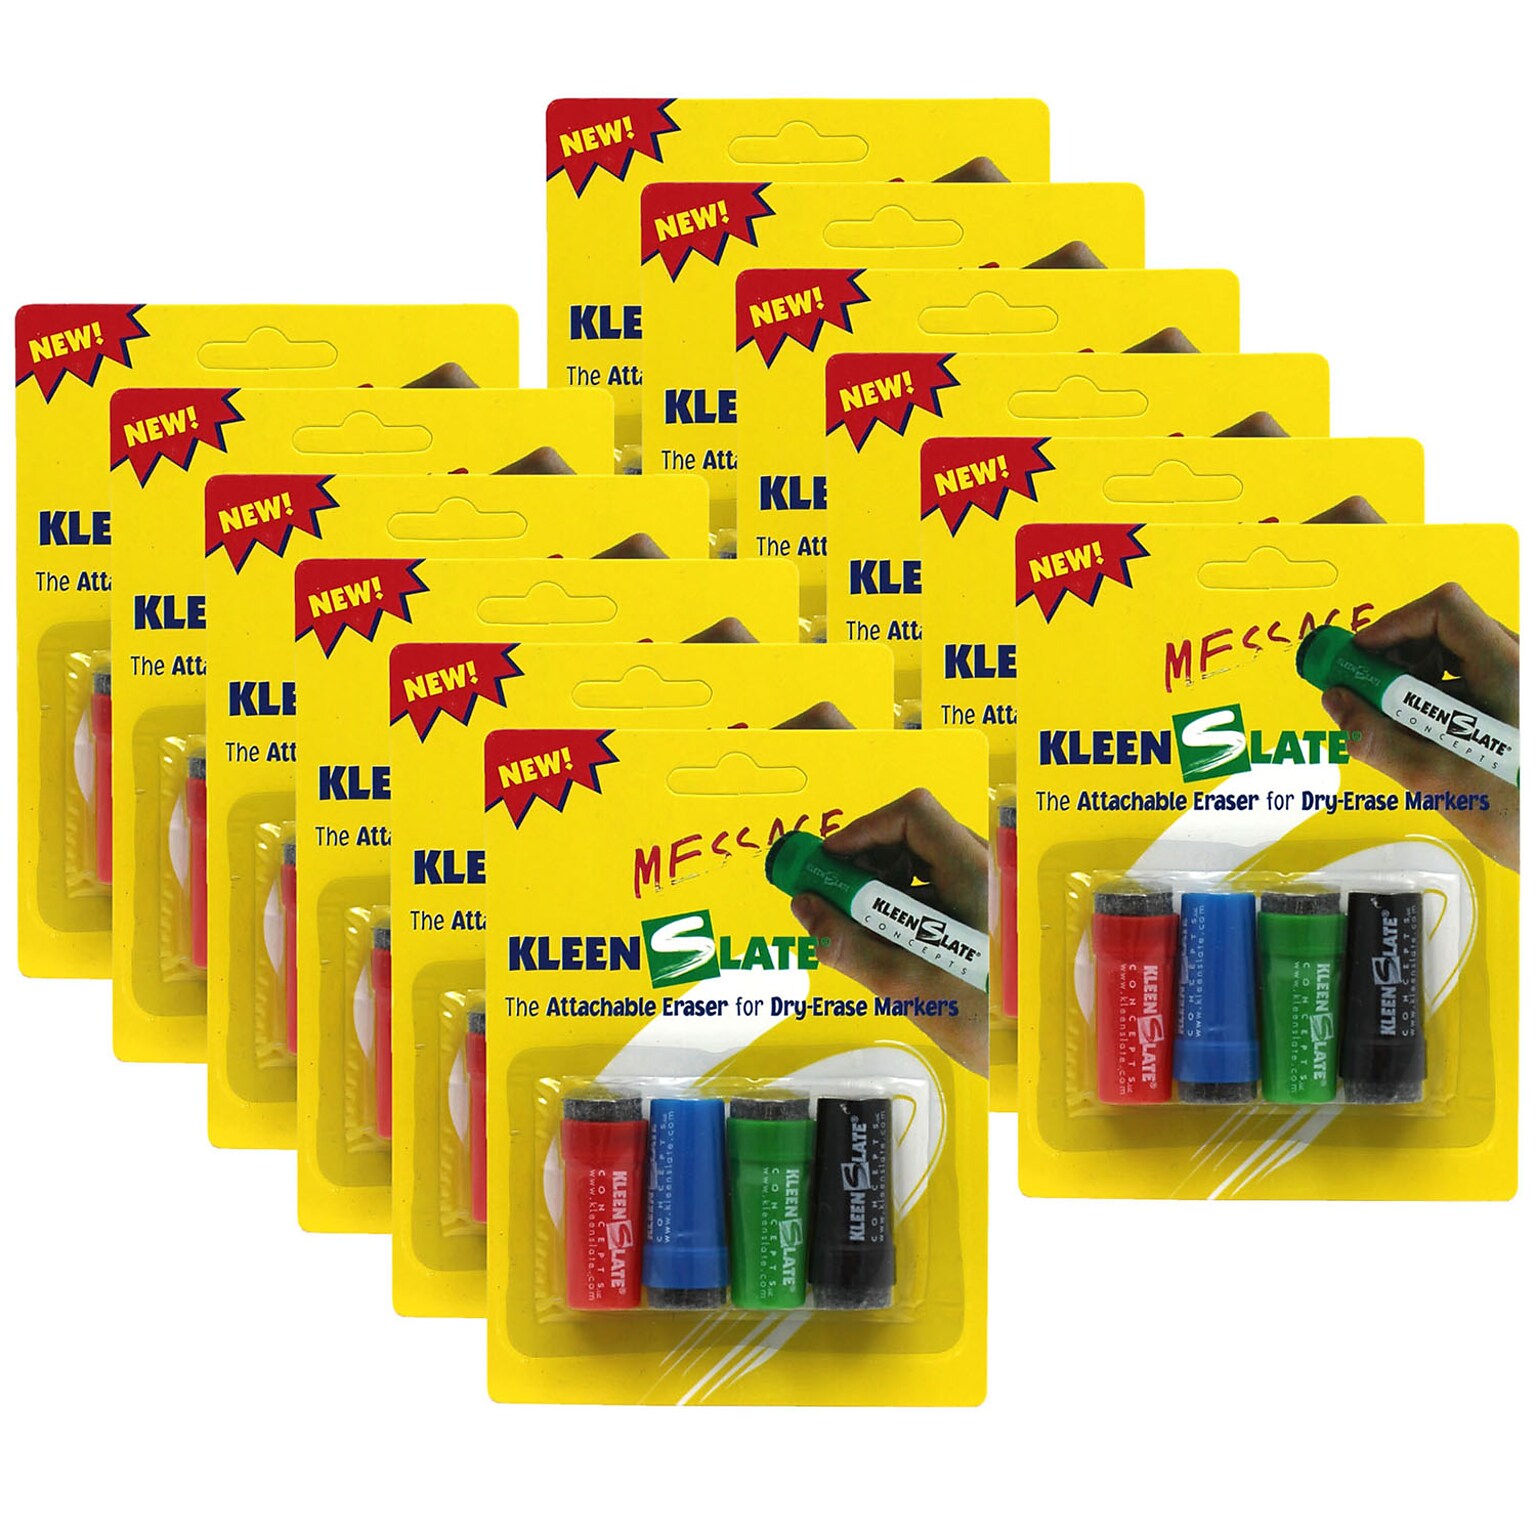 KleenSlate Attachable Erasers for Dry-Erase Markers, 4 Per Pack, 12 Packs (KLS0432-12)